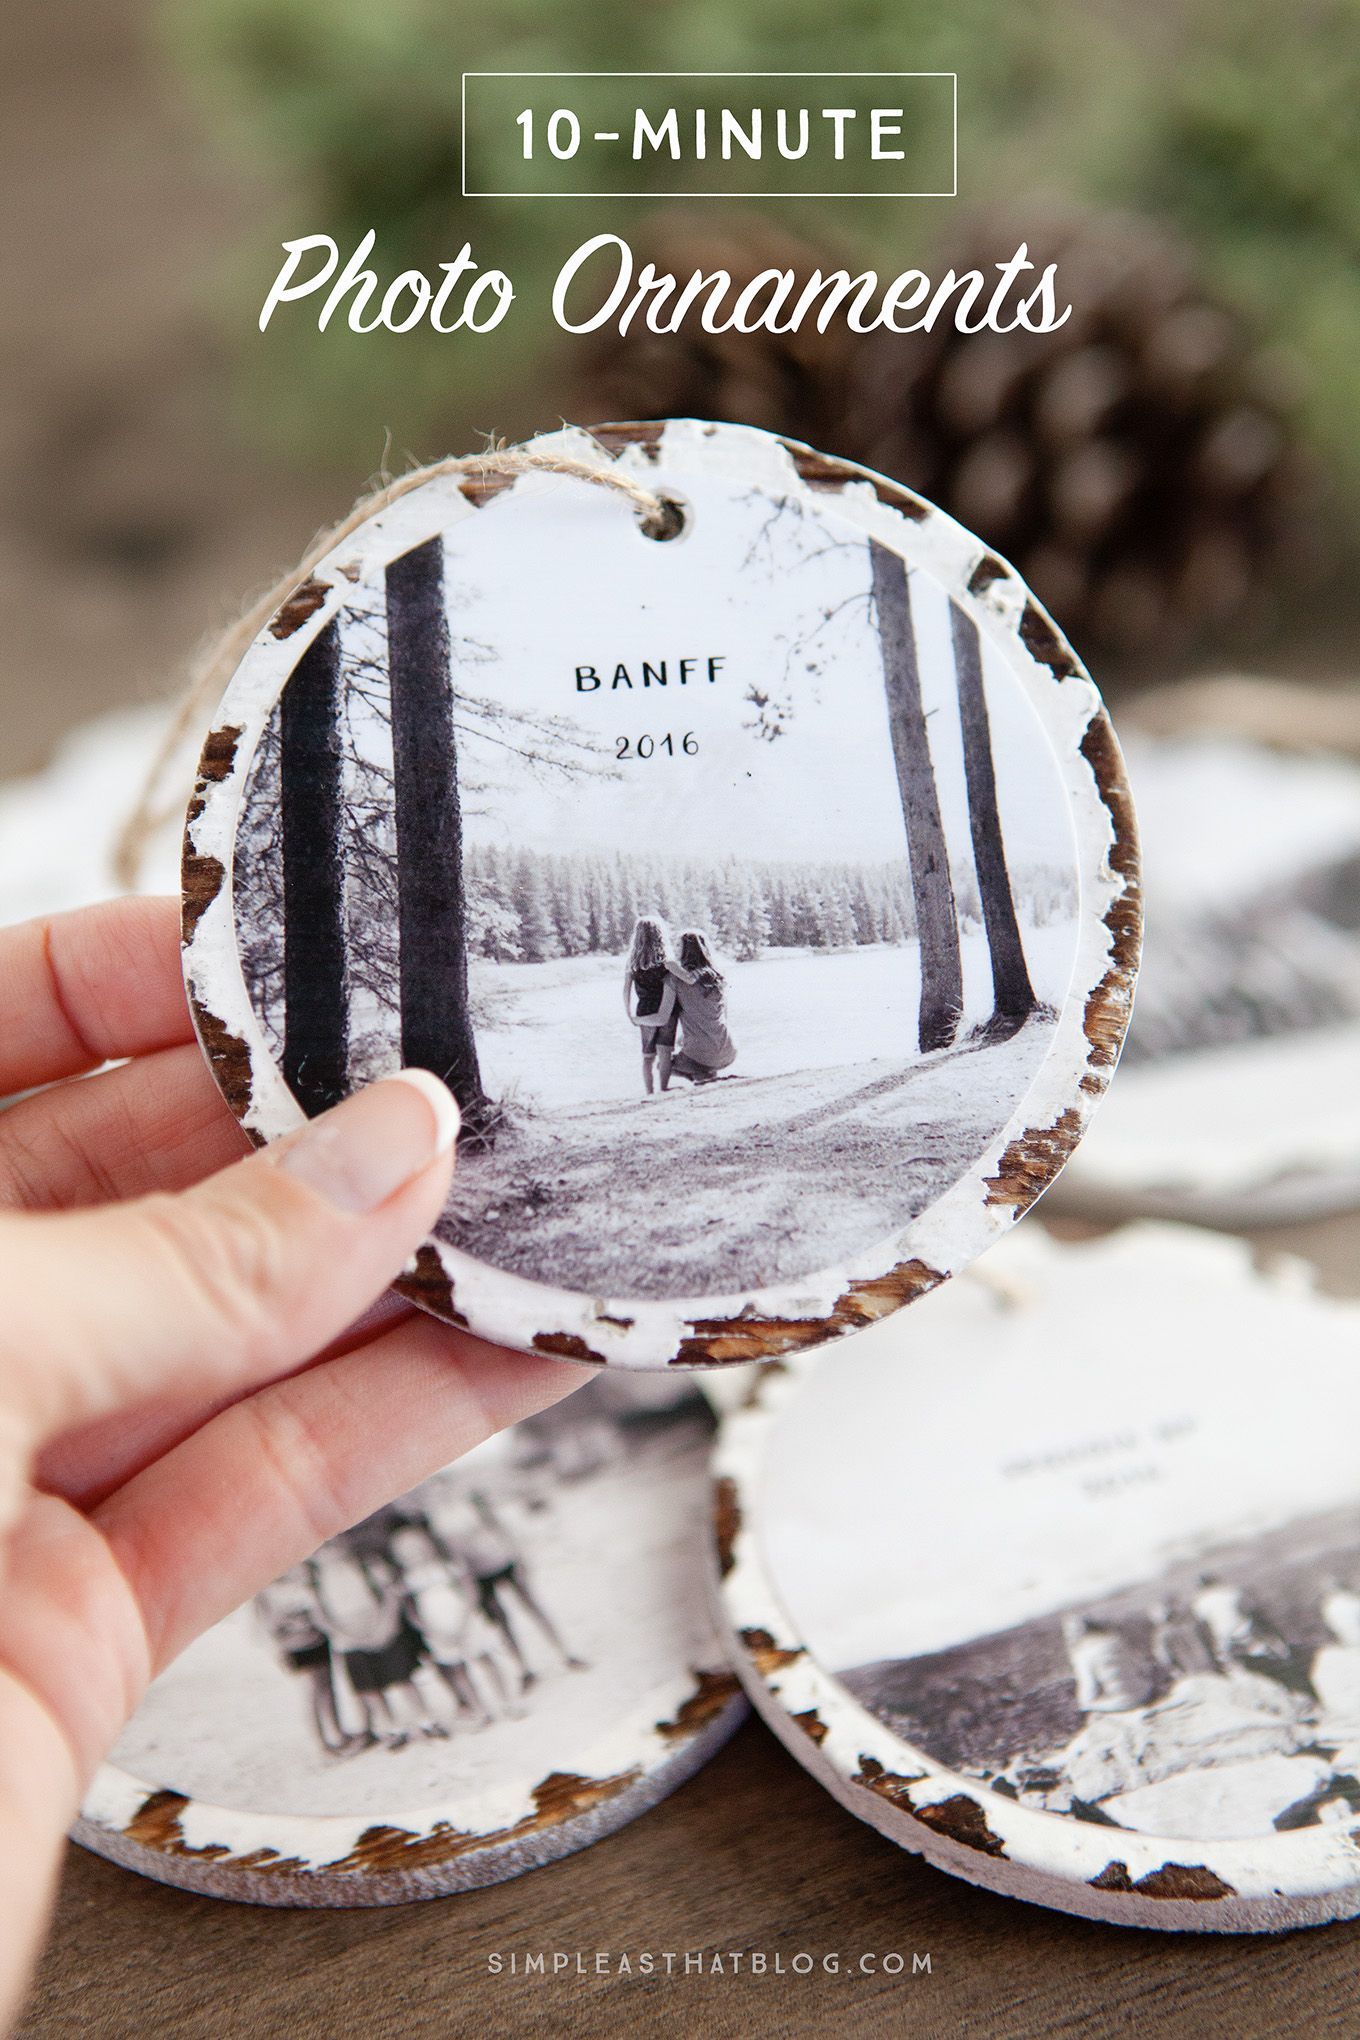 Trim the tree with these 10 minute photo keepsake ornaments. They take no time at all to make and it will mean so much to fill the